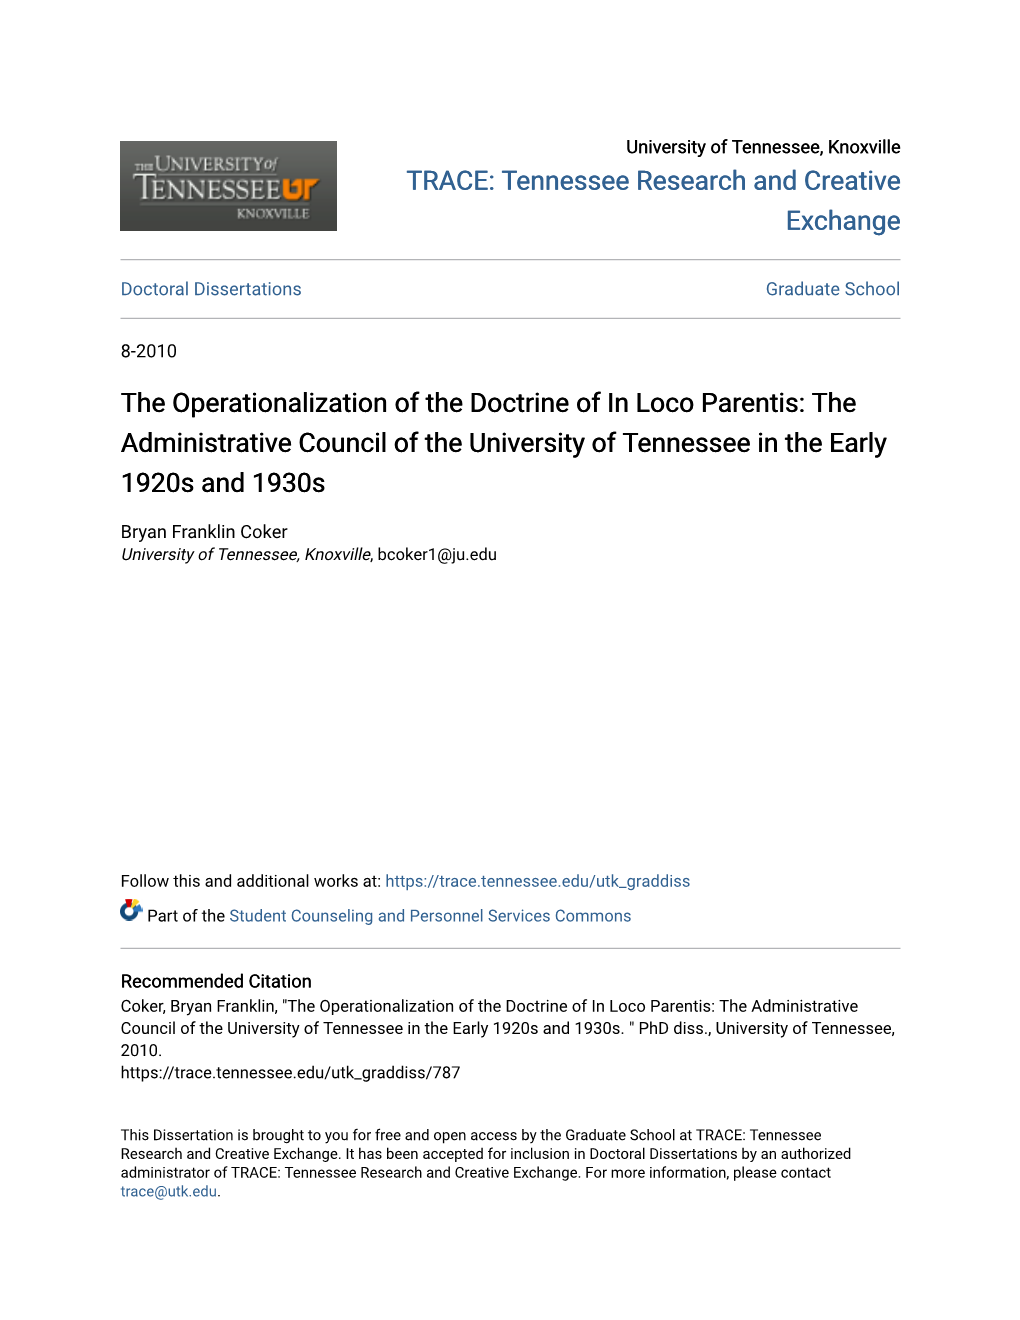 The Operationalization of the Doctrine of in Loco Parentis: the Administrative Council of the University of Tennessee in the Early 1920S and 1930S